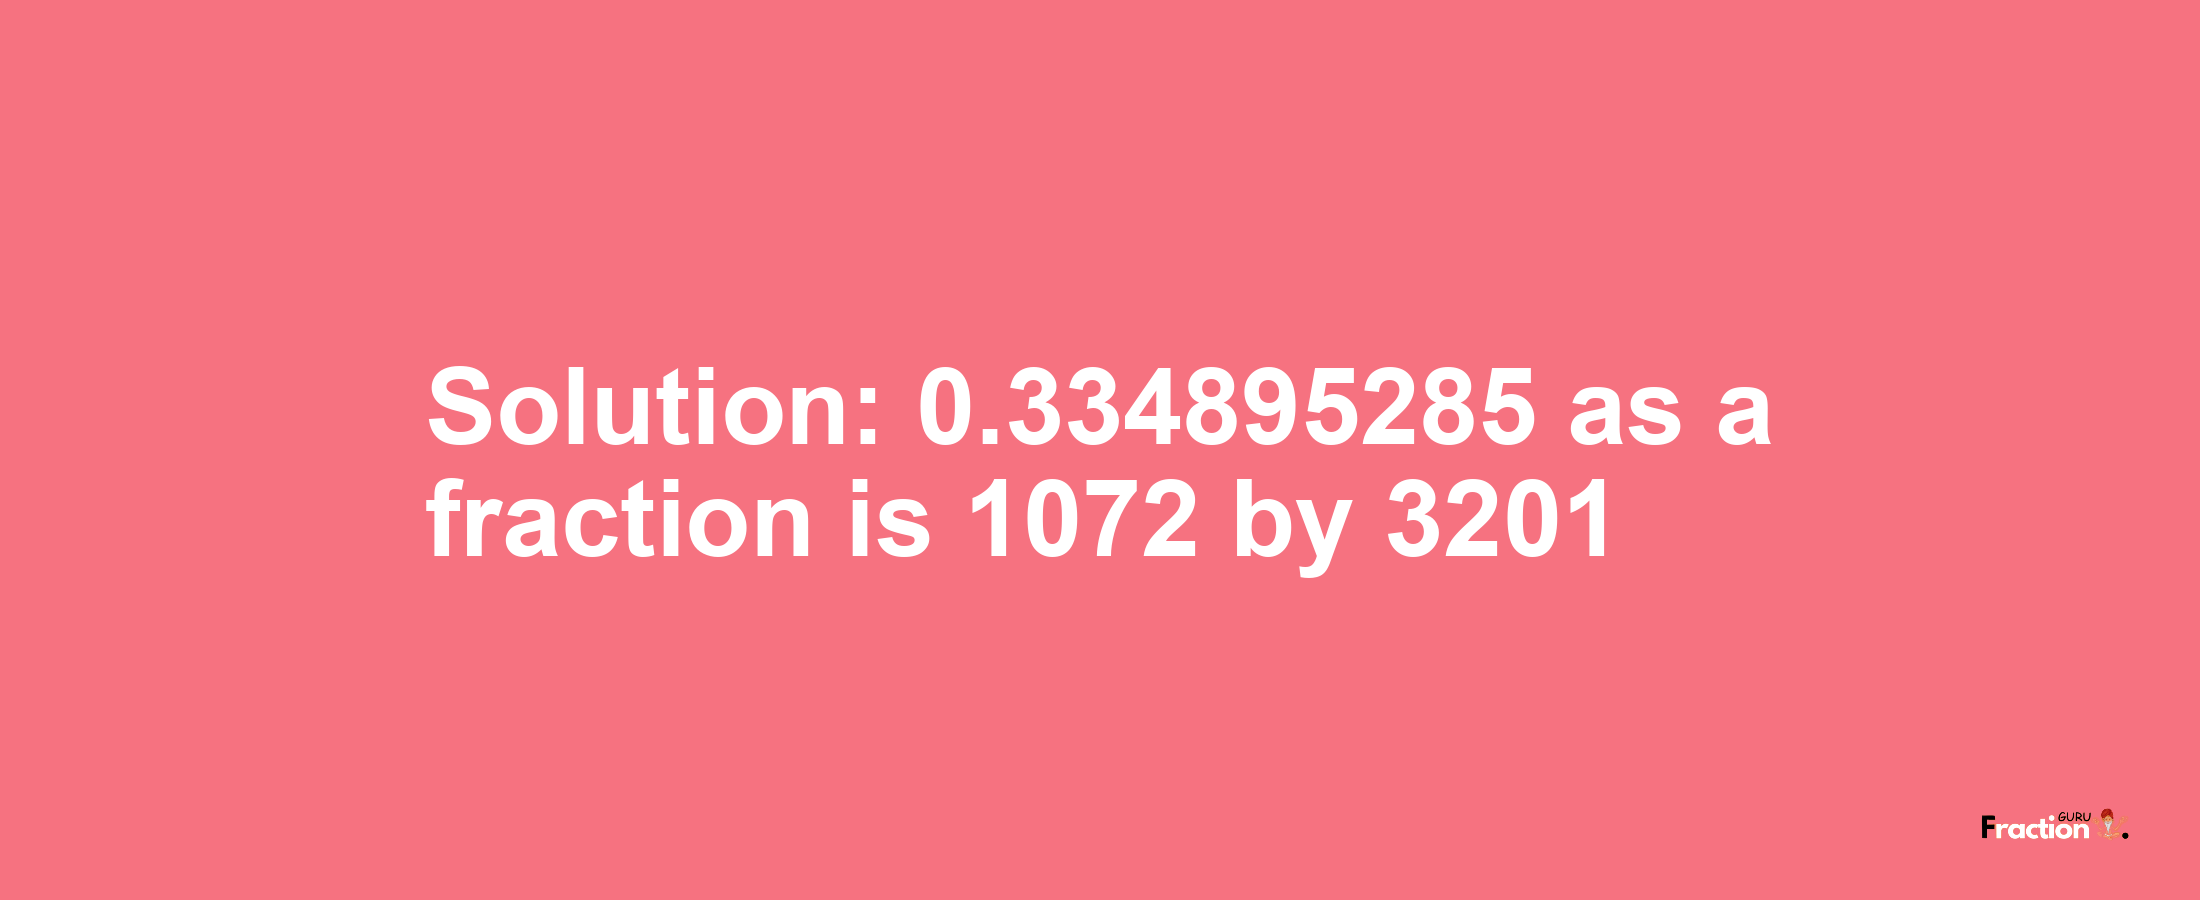 Solution:0.334895285 as a fraction is 1072/3201